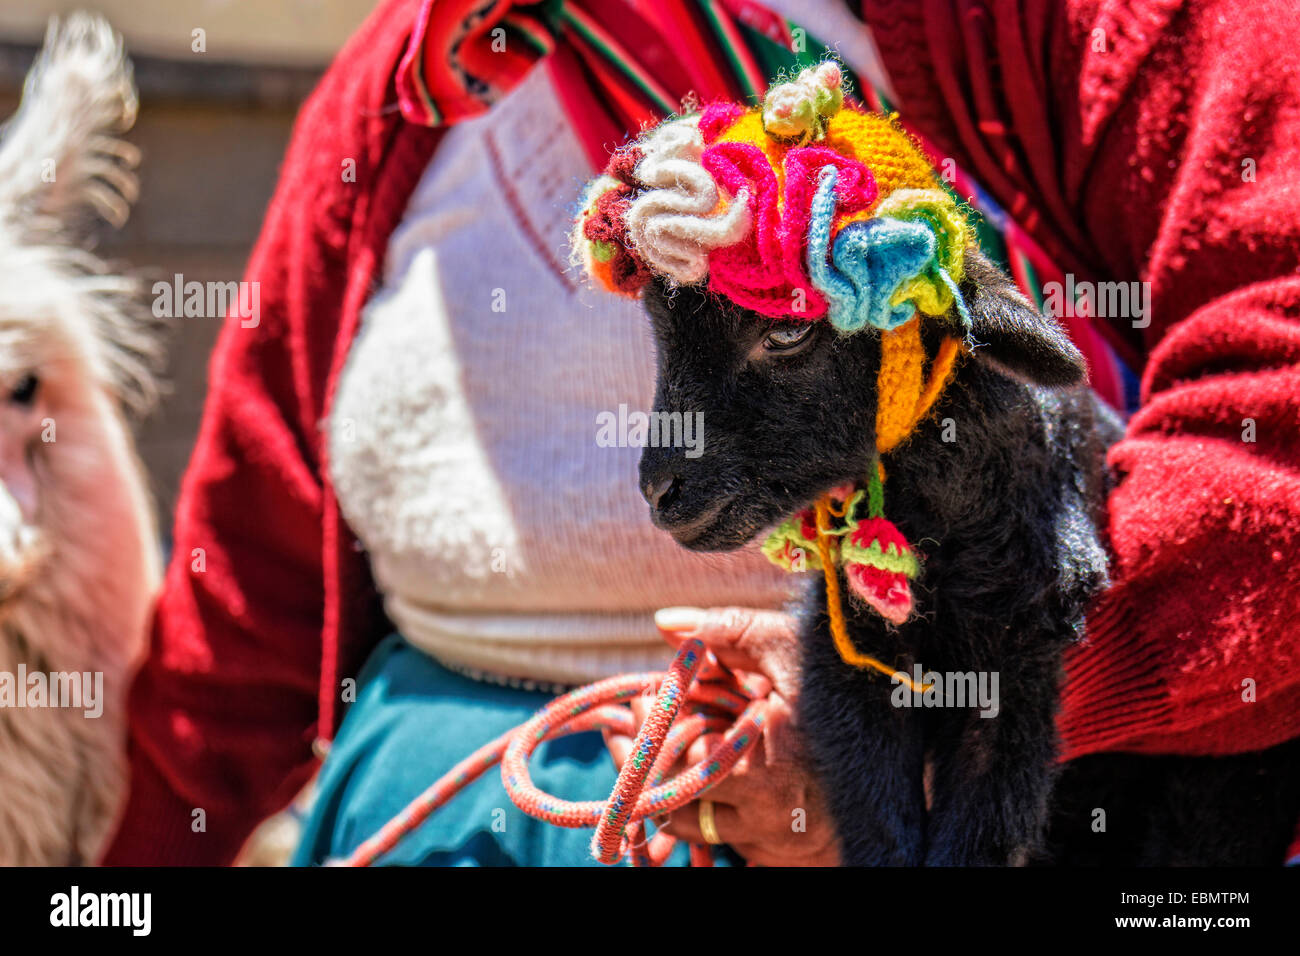 Peruvian woman holds cute black baby alpaca with knitted cap  in her arms. Stock Photo